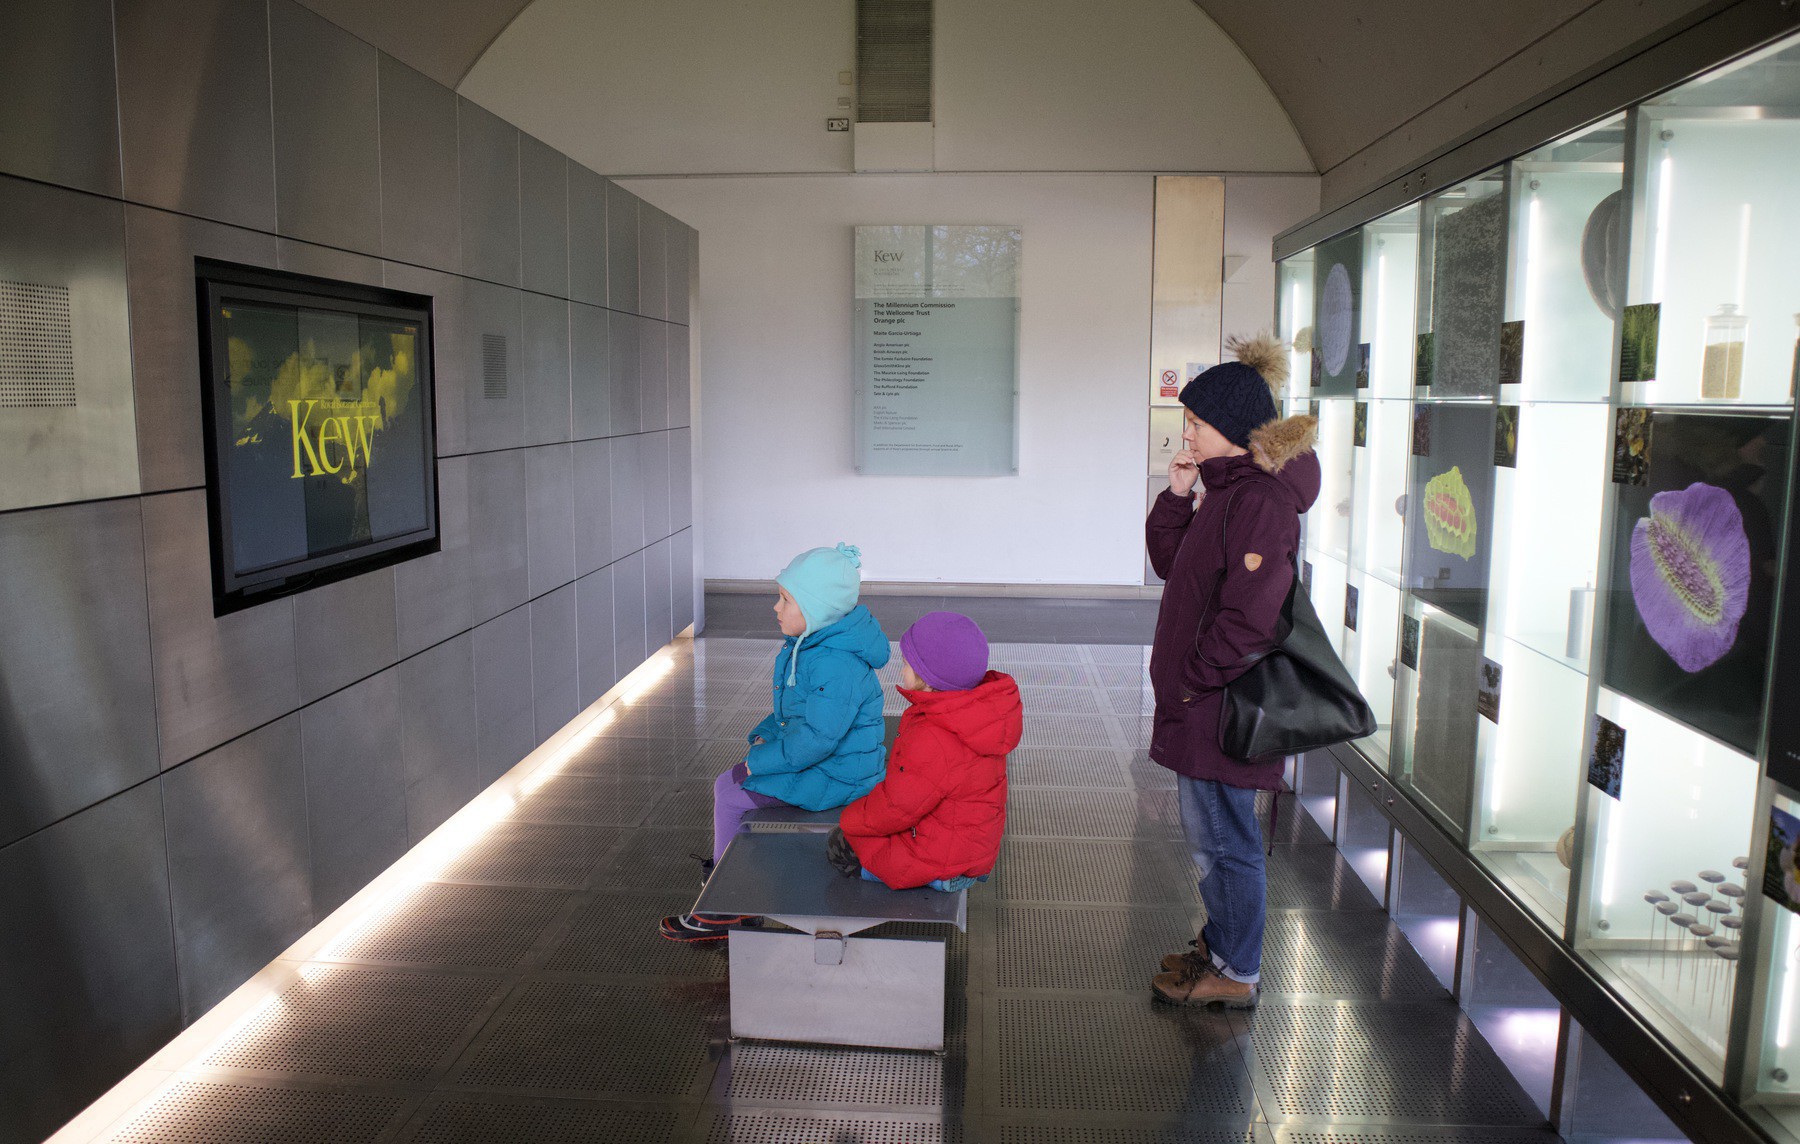 The family watching a video at the Millenium Seed Bank